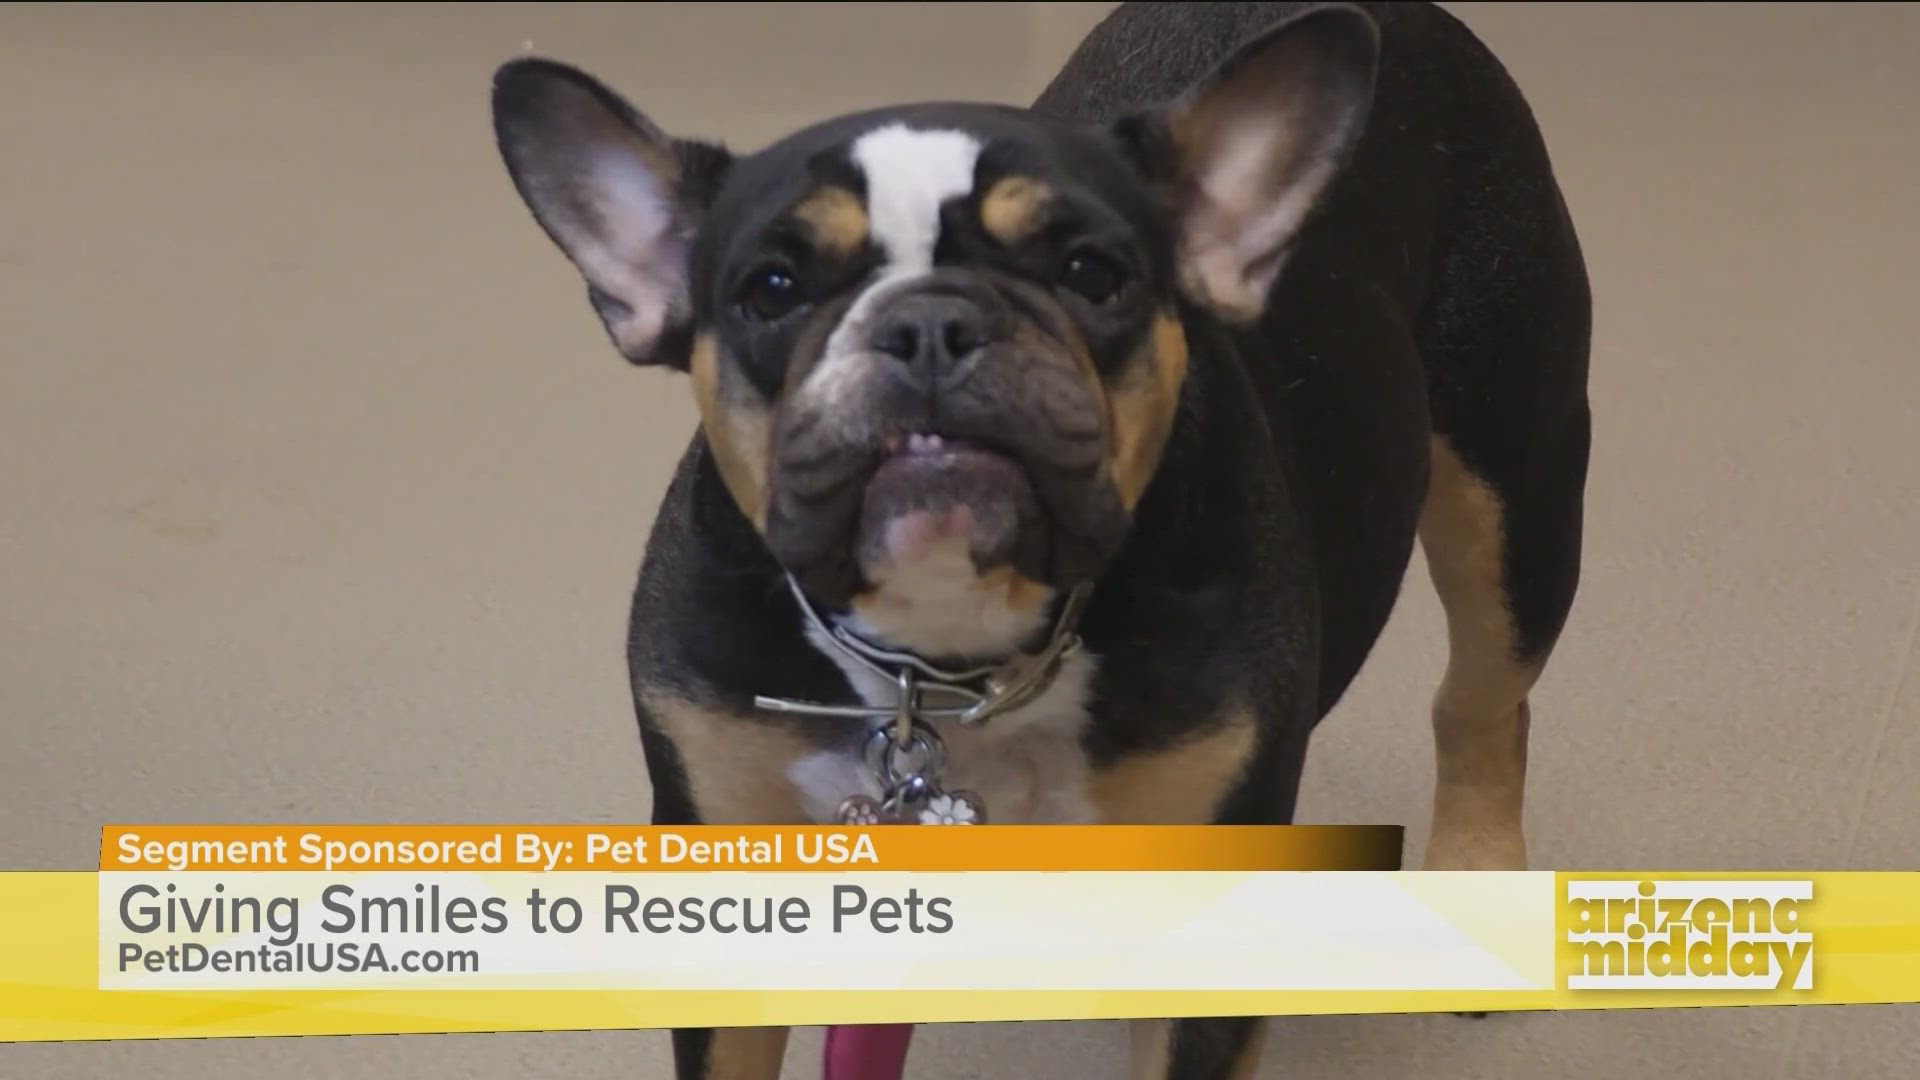 Dr. Jennifer Redmon with Pet Dental USA shares how they help support rescue animals.